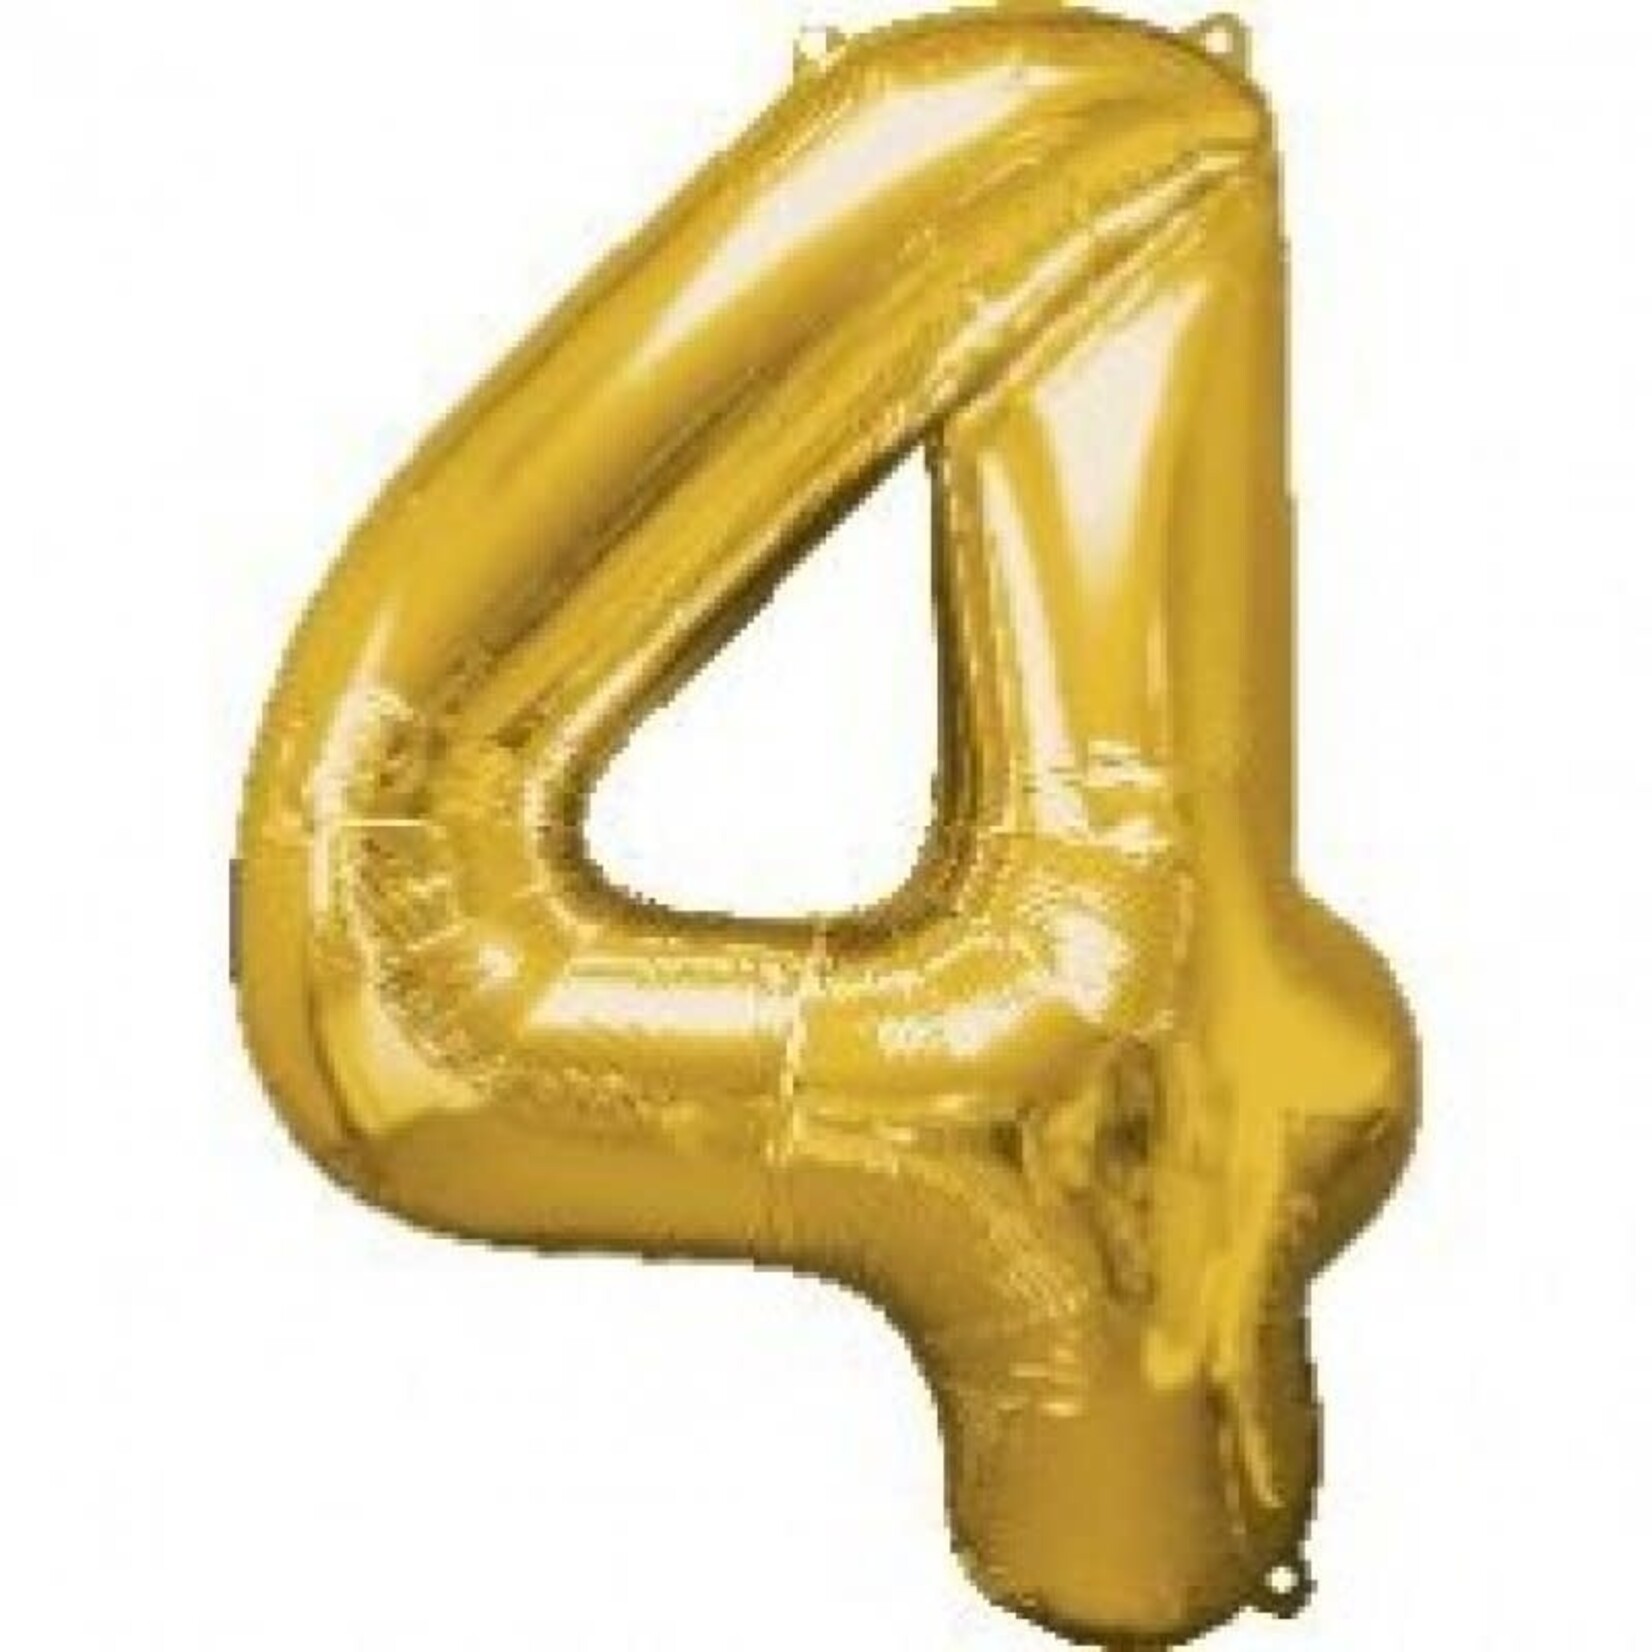 Jumbo Foil Number Balloon 34 Inches